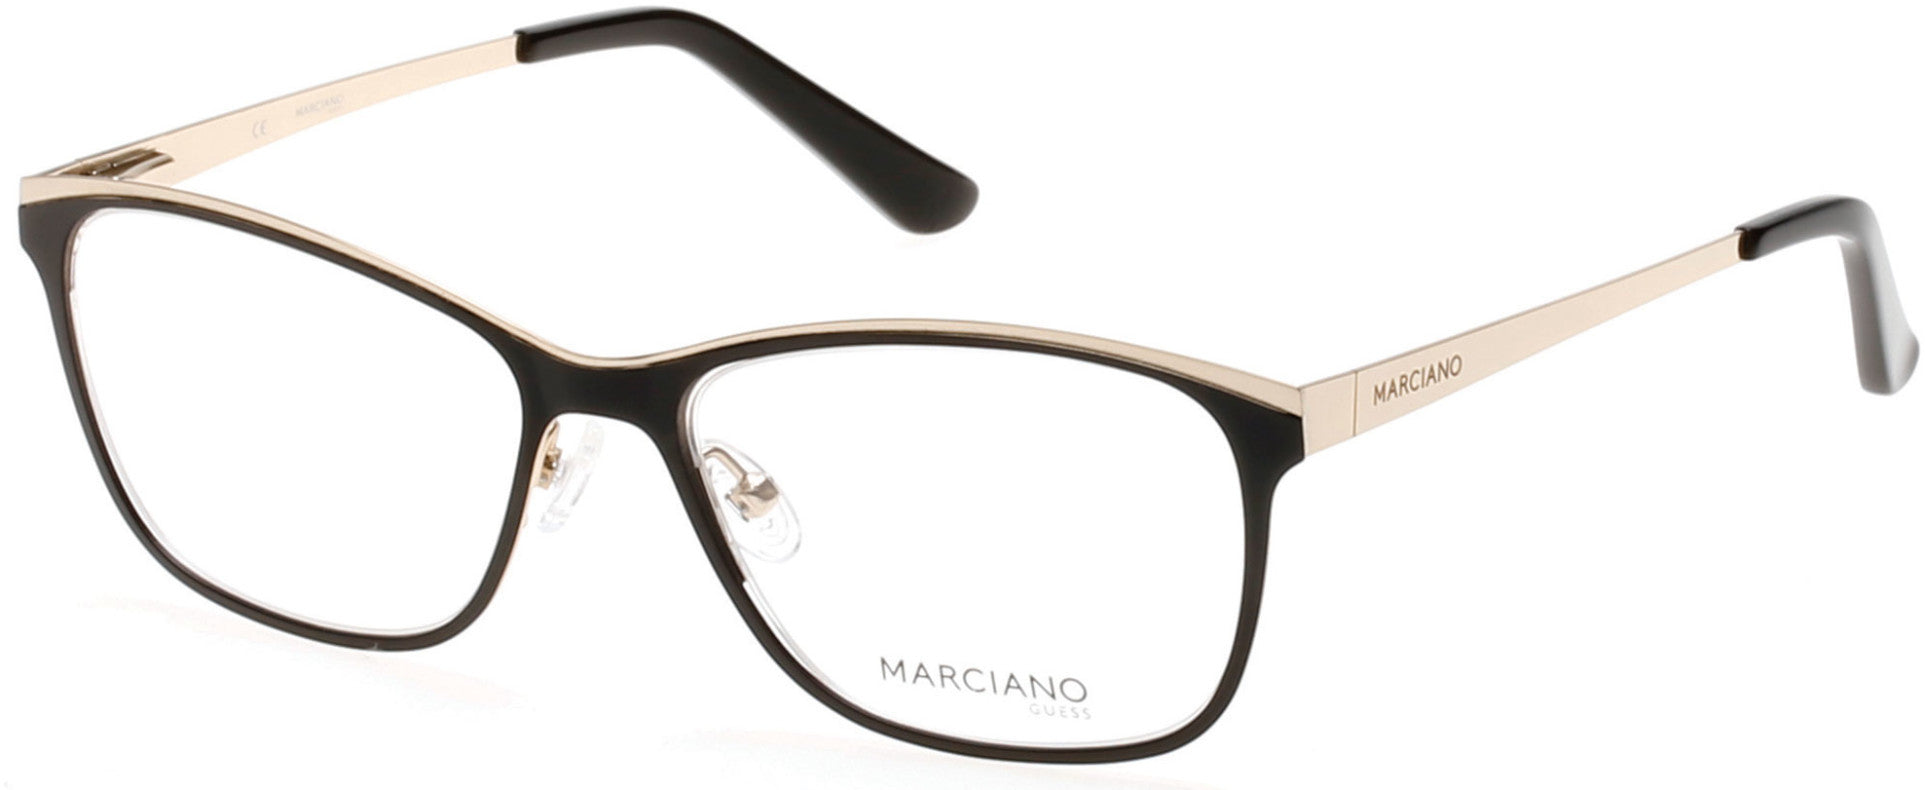 Guess By Marciano GM0255 Eyeglasses 005-005 - Black